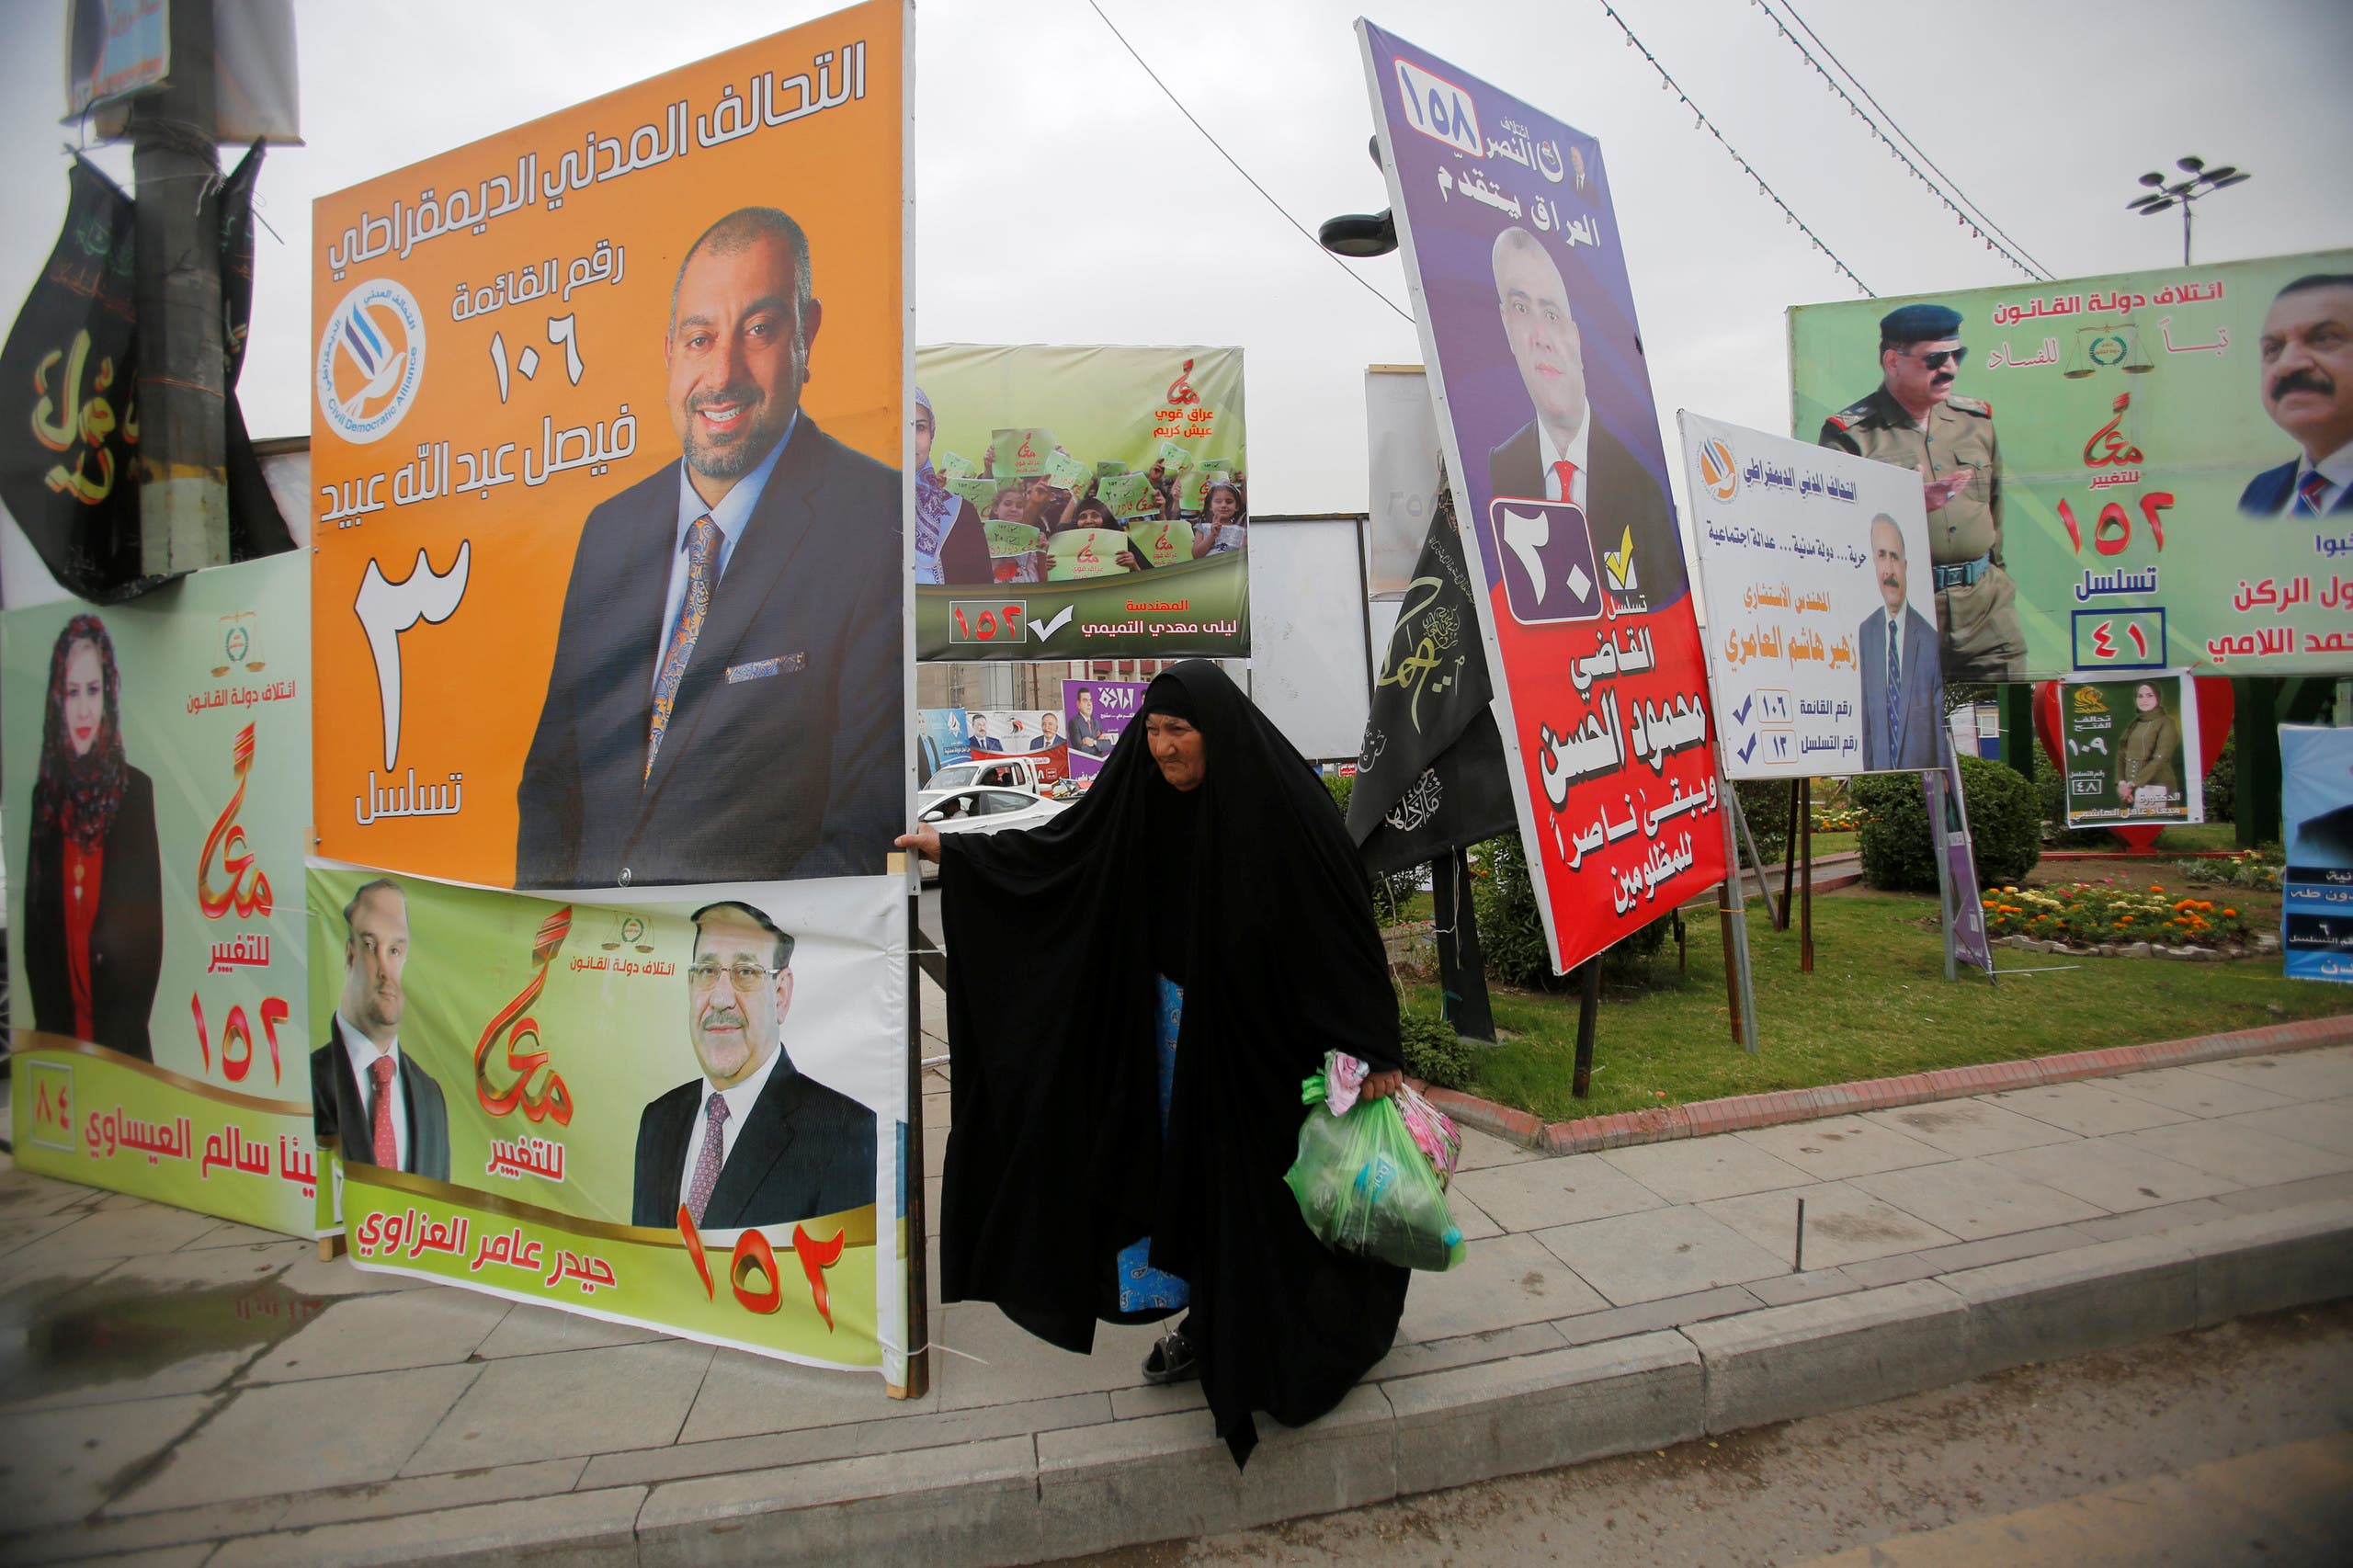 A woman walks past campaign posters of candidates ahead of parliamentary election, in Baghdad, Iraq April 22, 2018. REUTERS/Khalid al Mousily